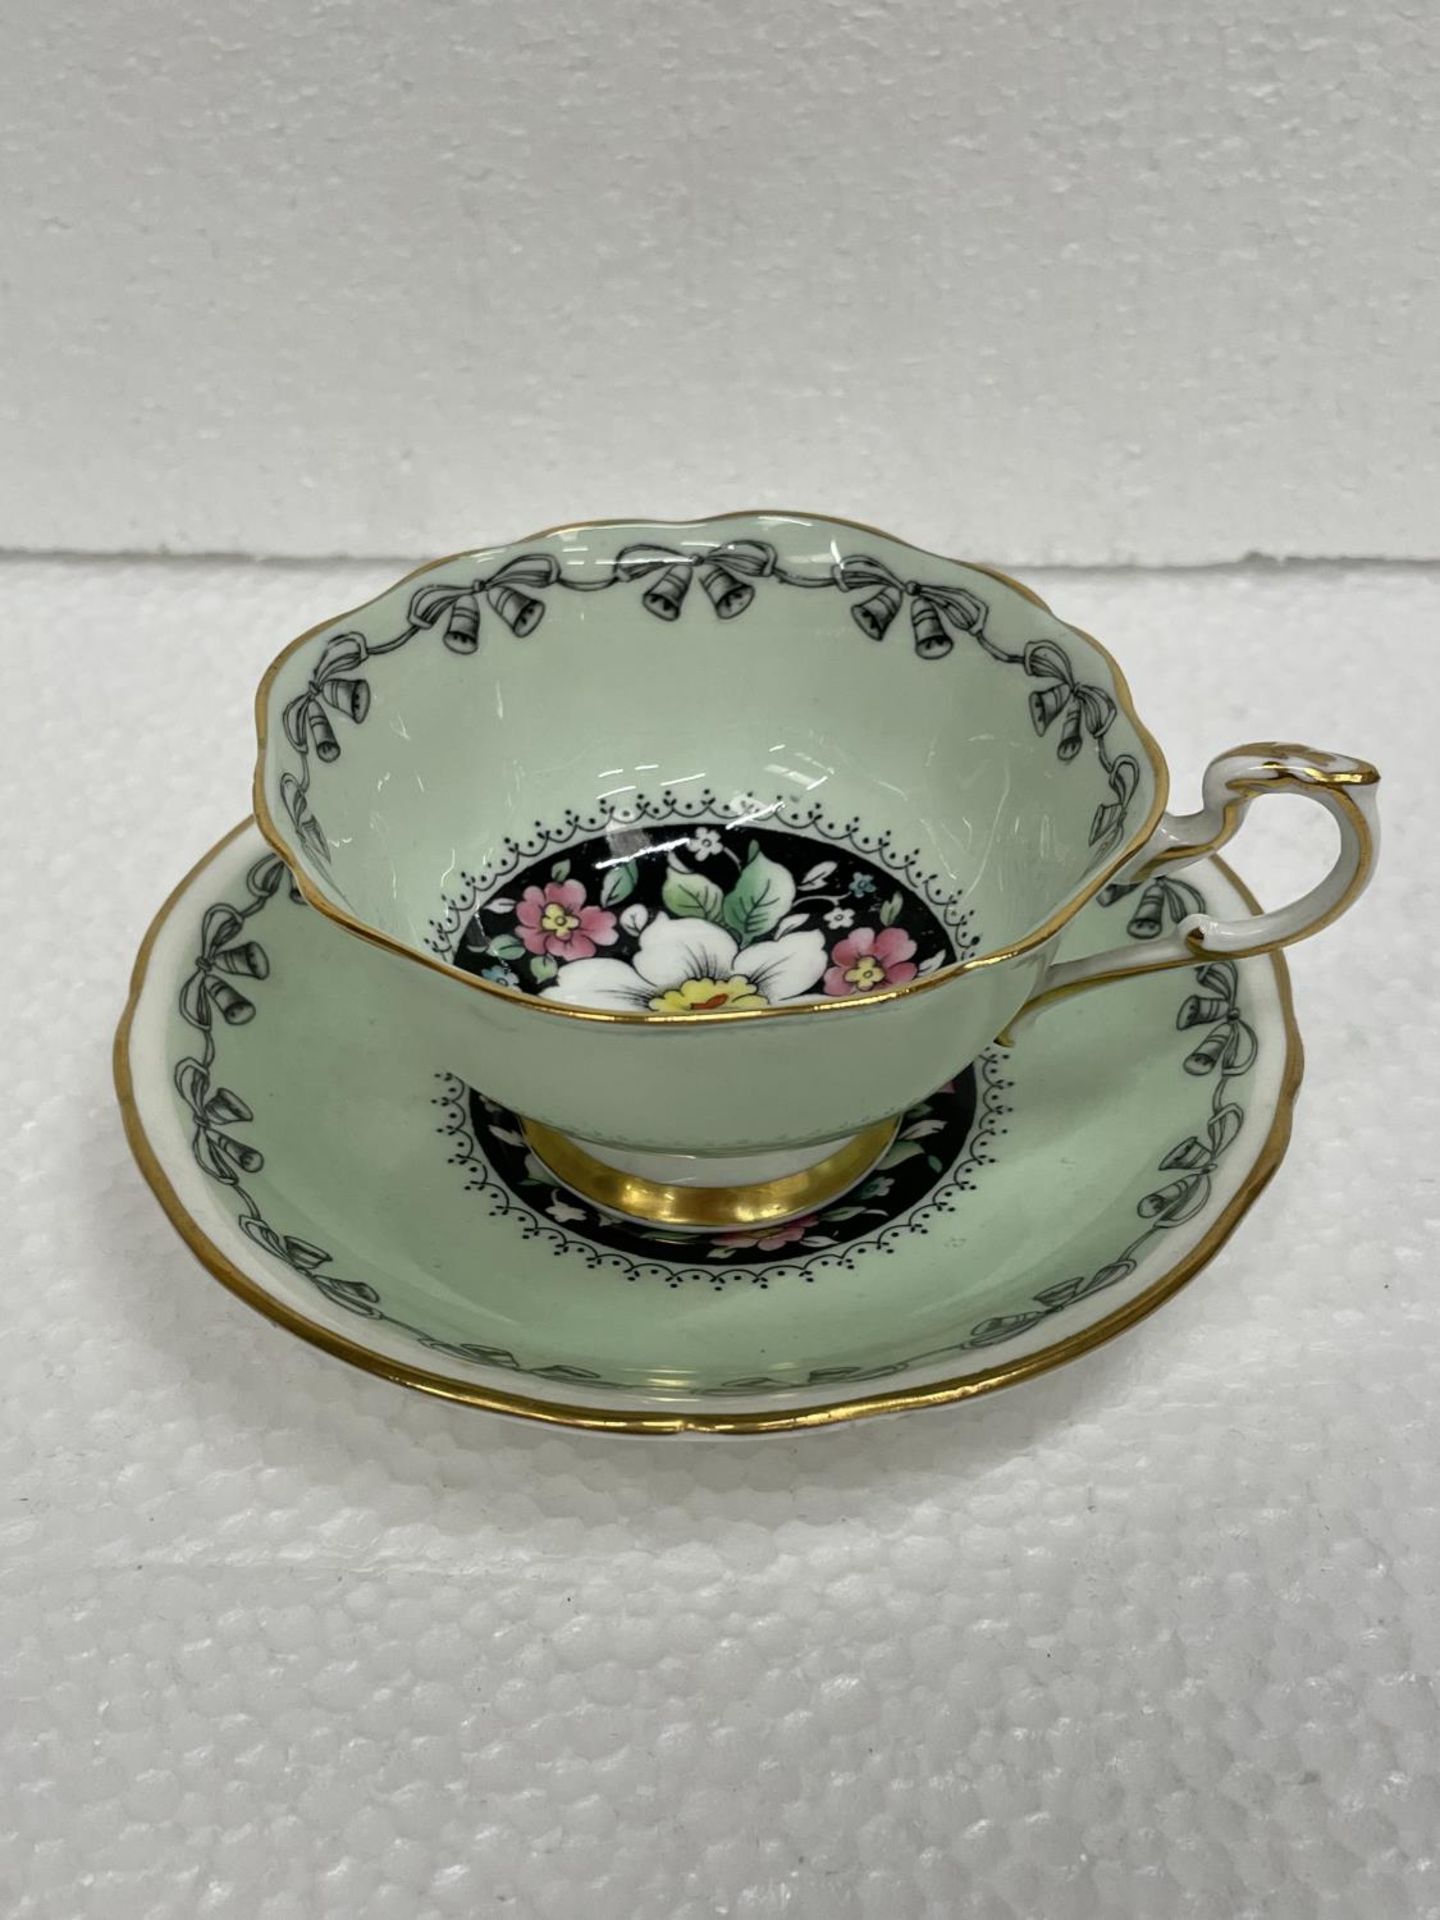 A PARAGON BY THE APPOINTMENT TO HM THE QUEEN AND HM QUEEN MARY CABINET CUP AND SAUCER IN GREEN